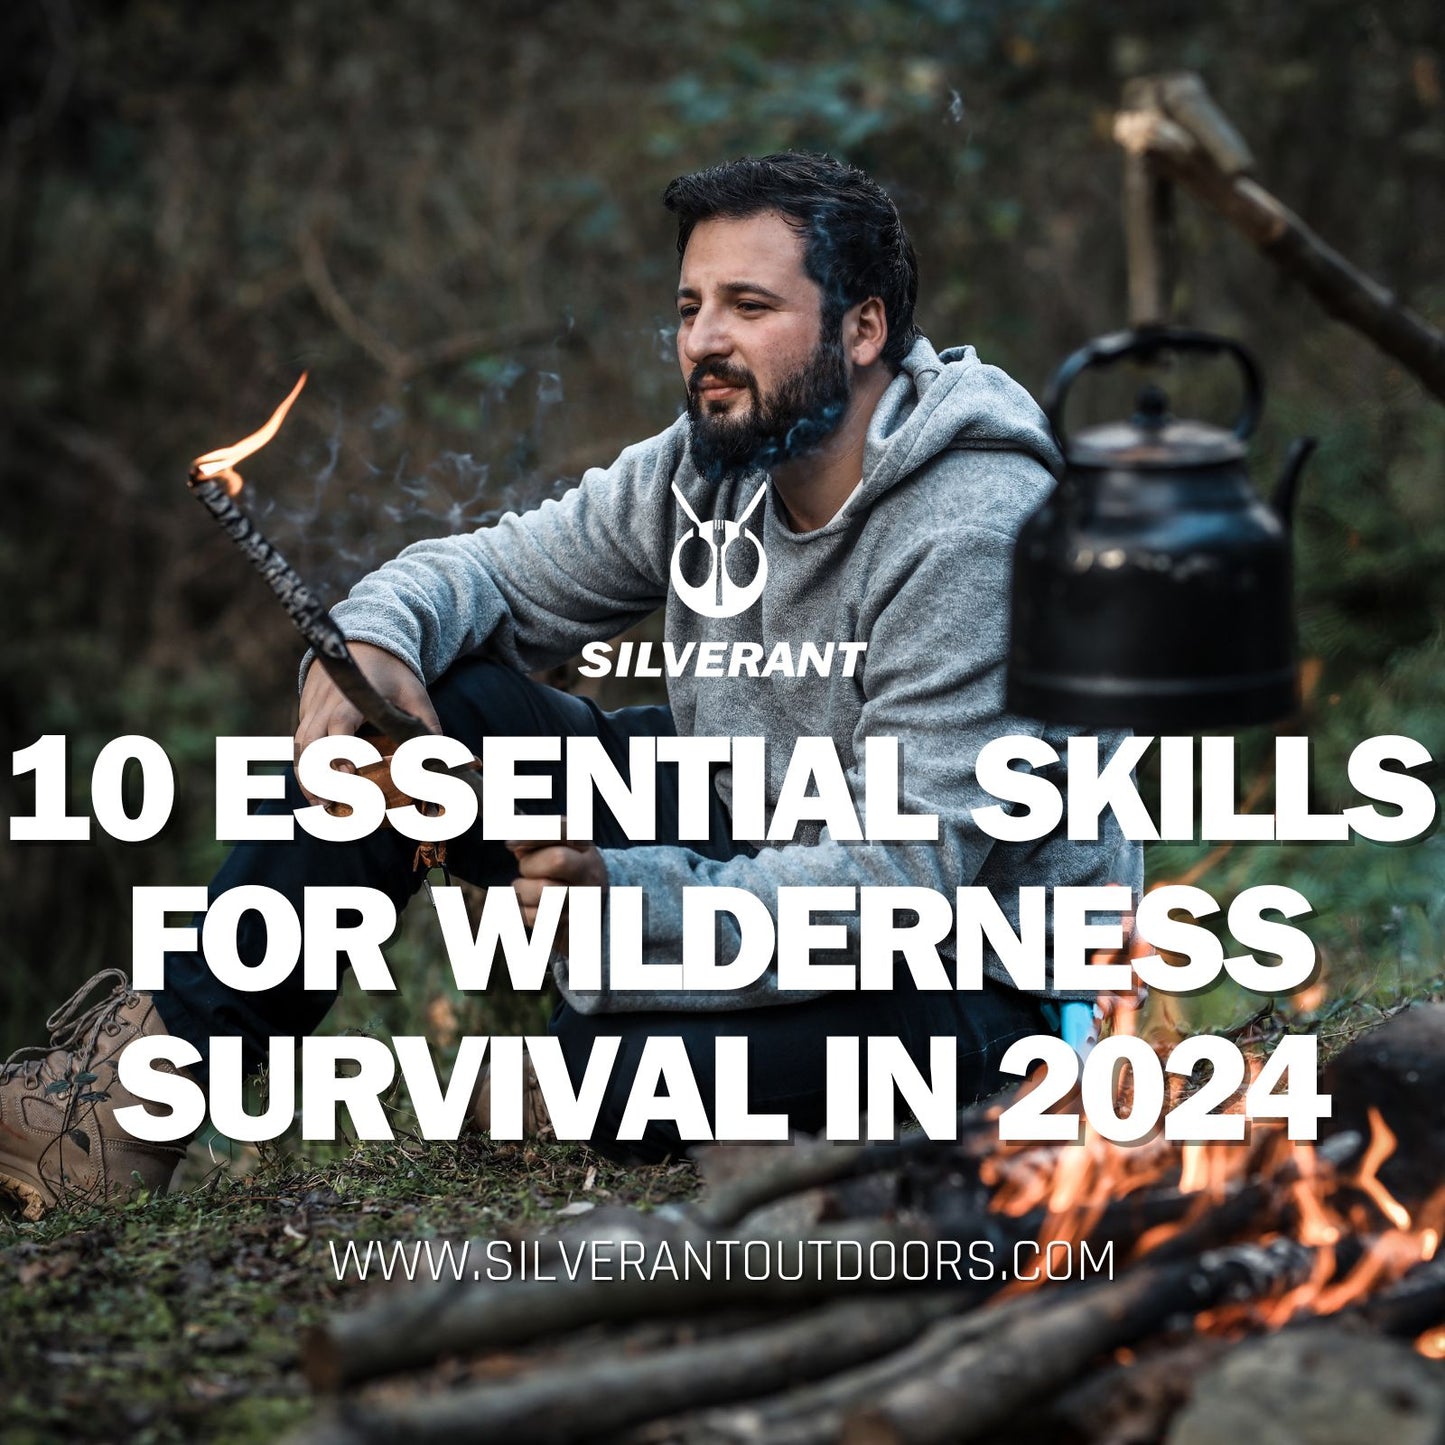 10 Essential Skills for Wilderness Survival in 2024